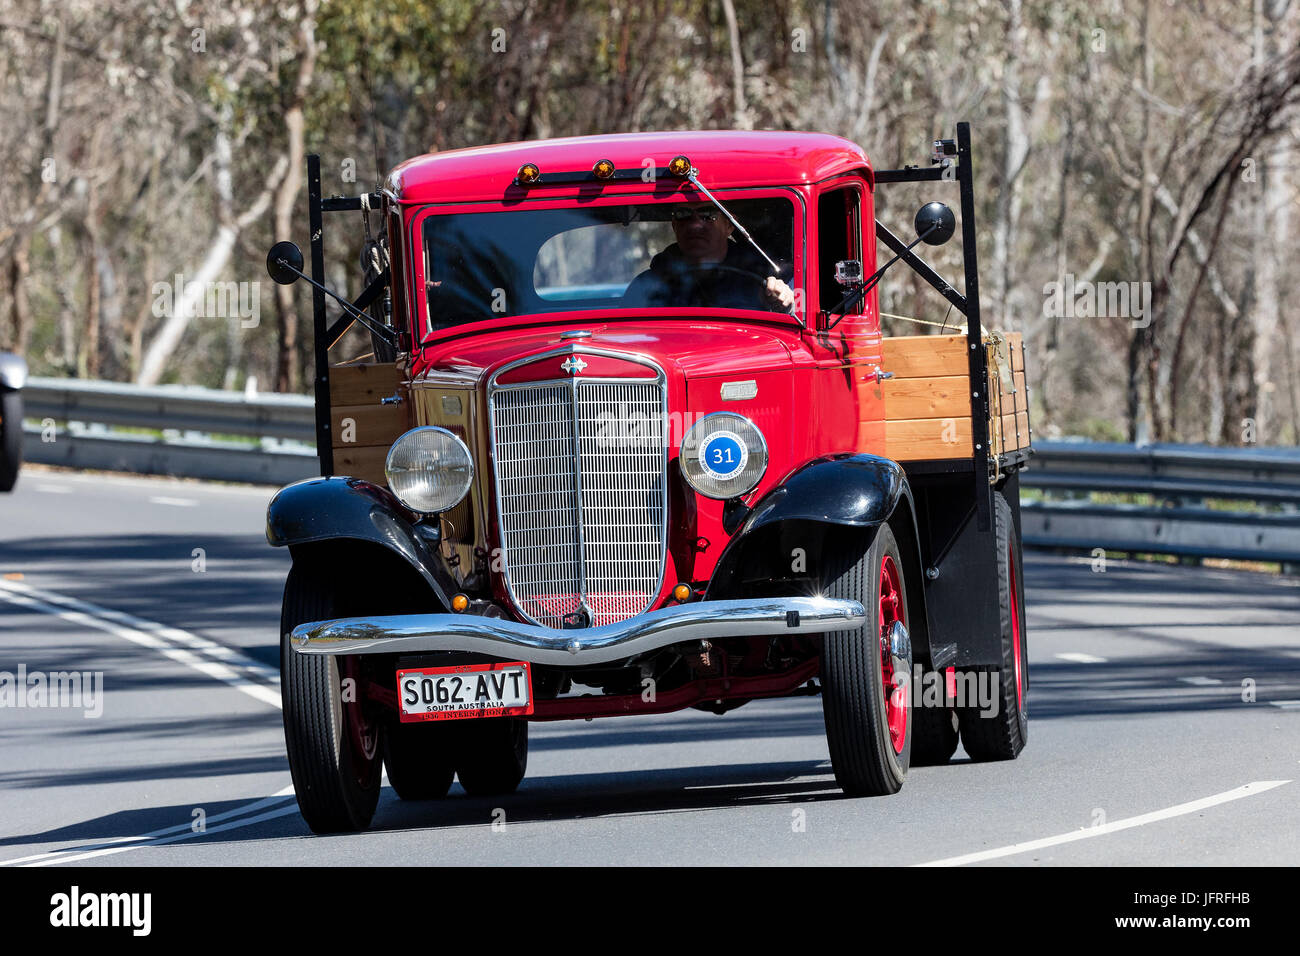 Vintage International Flat bed truck driving on country roads near the town of Birdwood, South Australia. Stock Photo